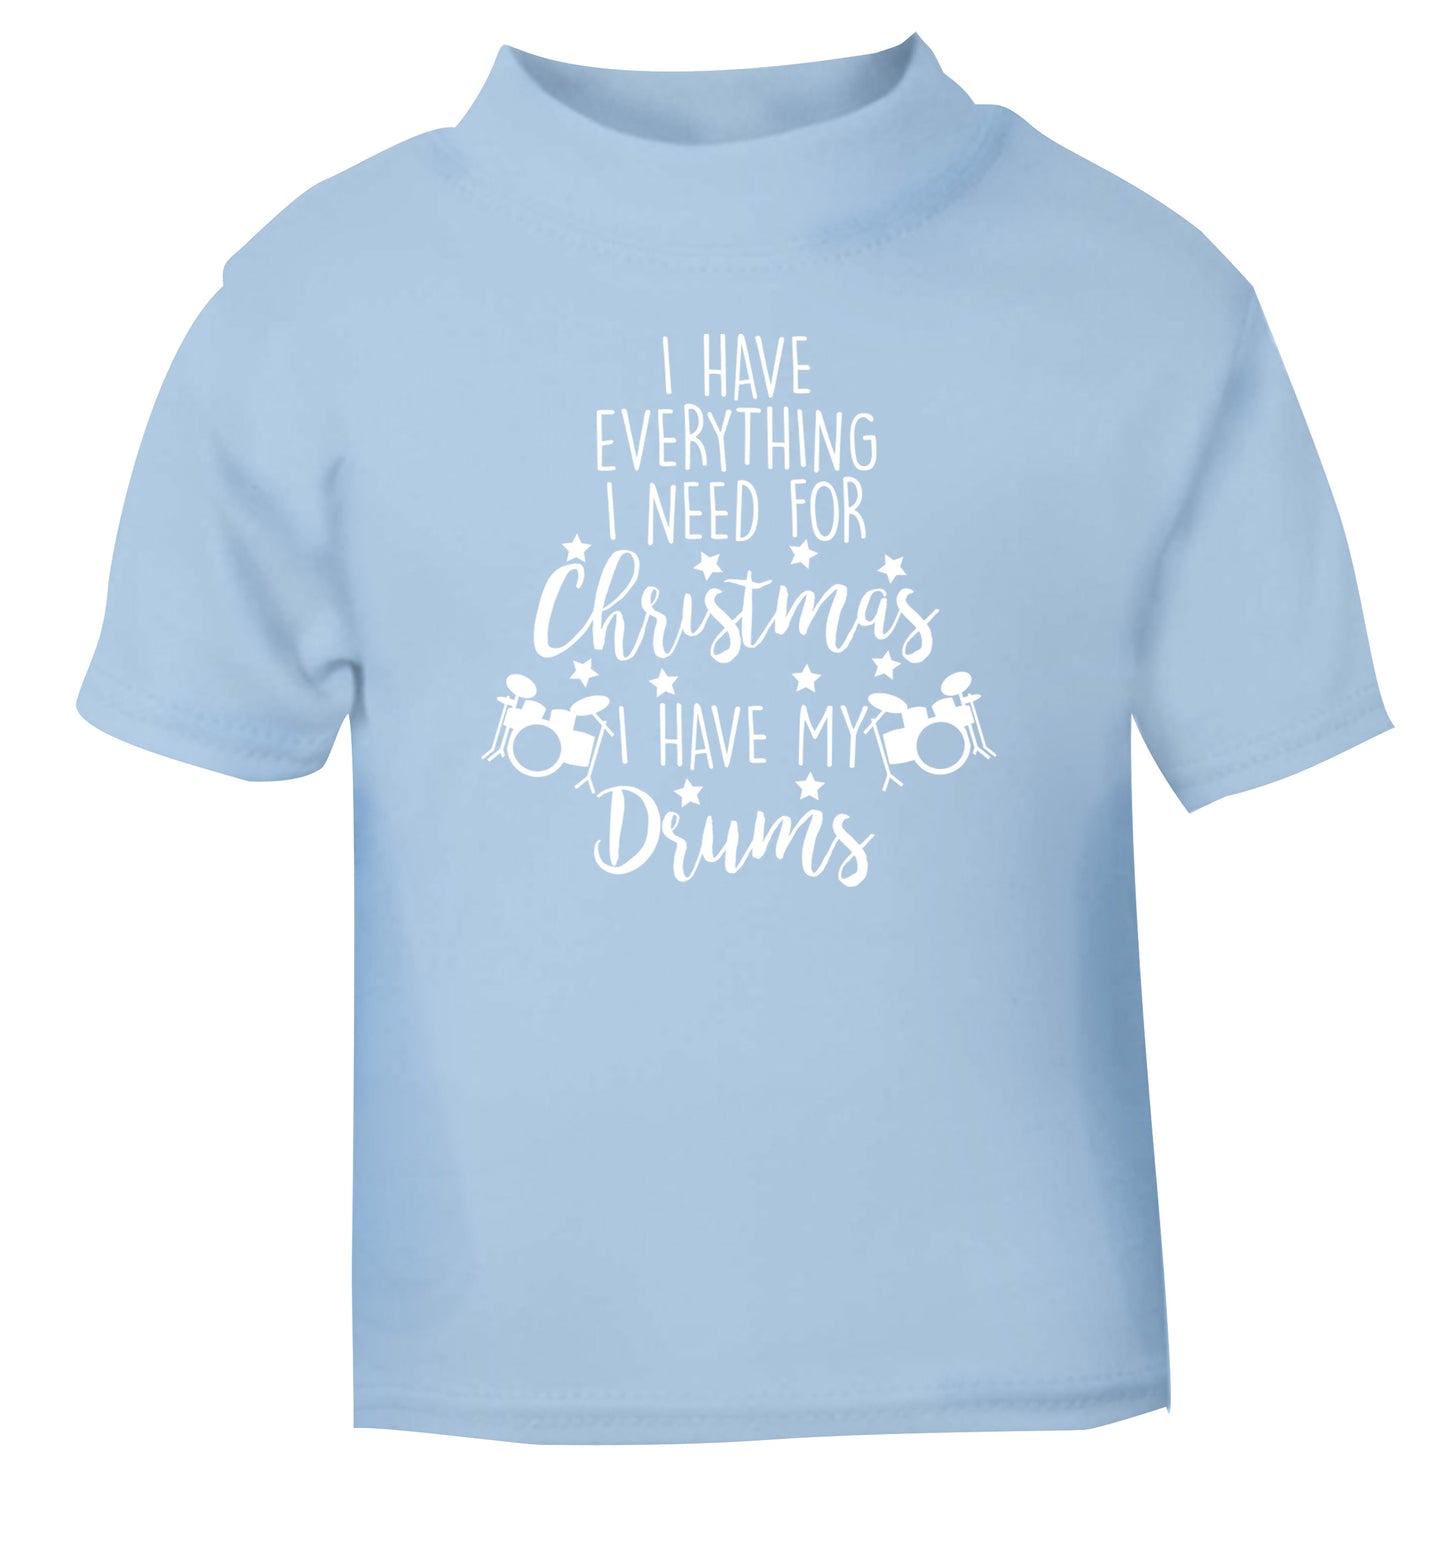 I have everything I need for Christmas I have my drums! light blue Baby Toddler Tshirt 2 Years